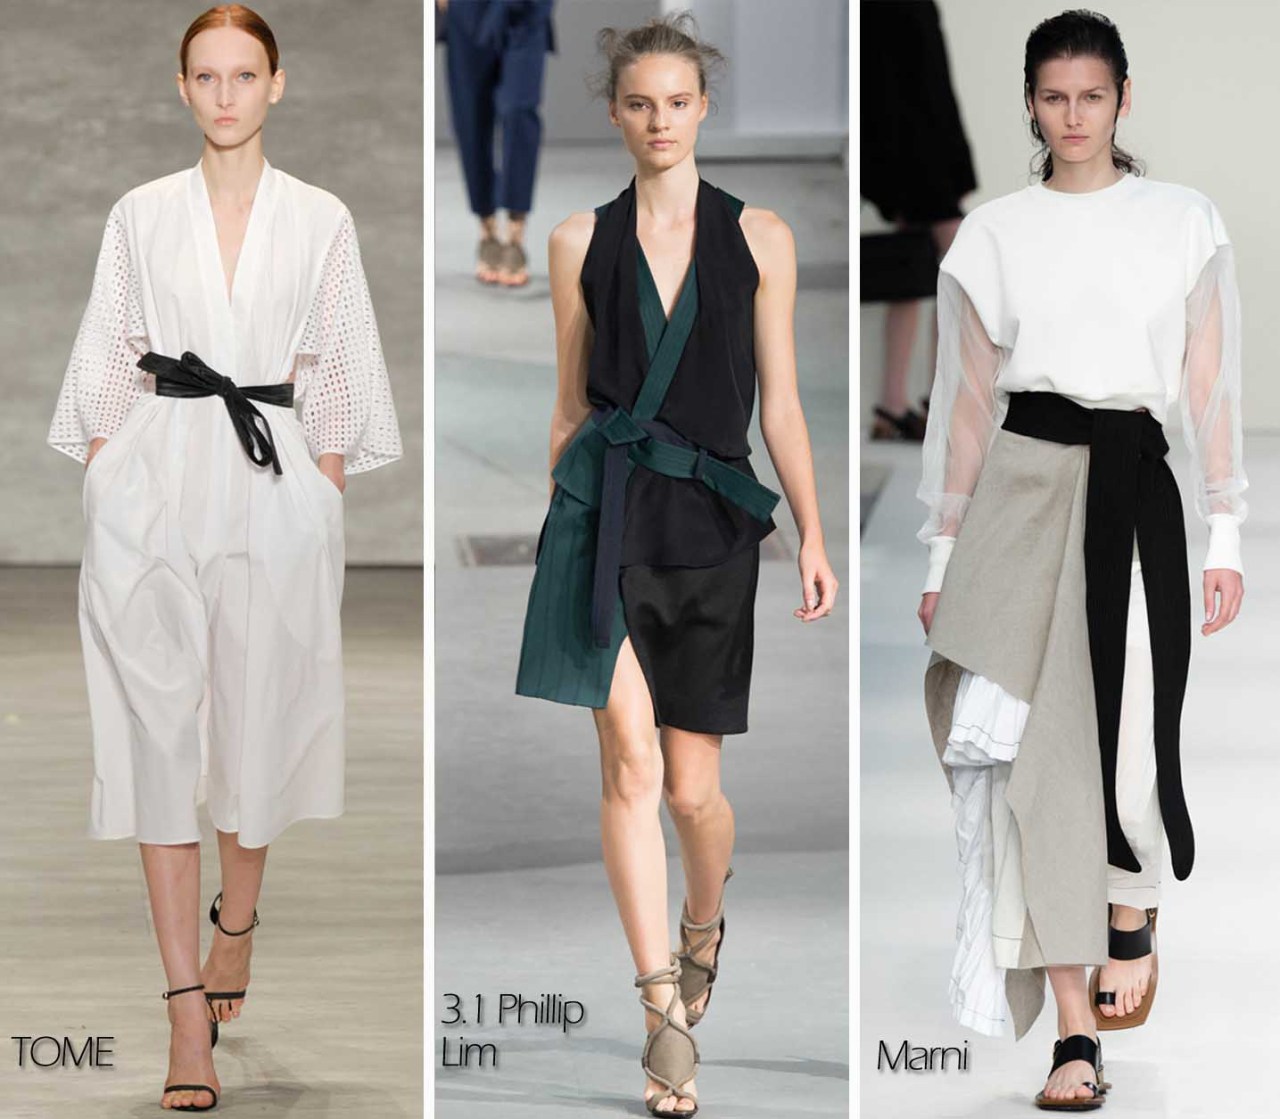 Inspected Trend: Put A Belt On It featuring Tome, 3.1 Phillip Lim, Marni